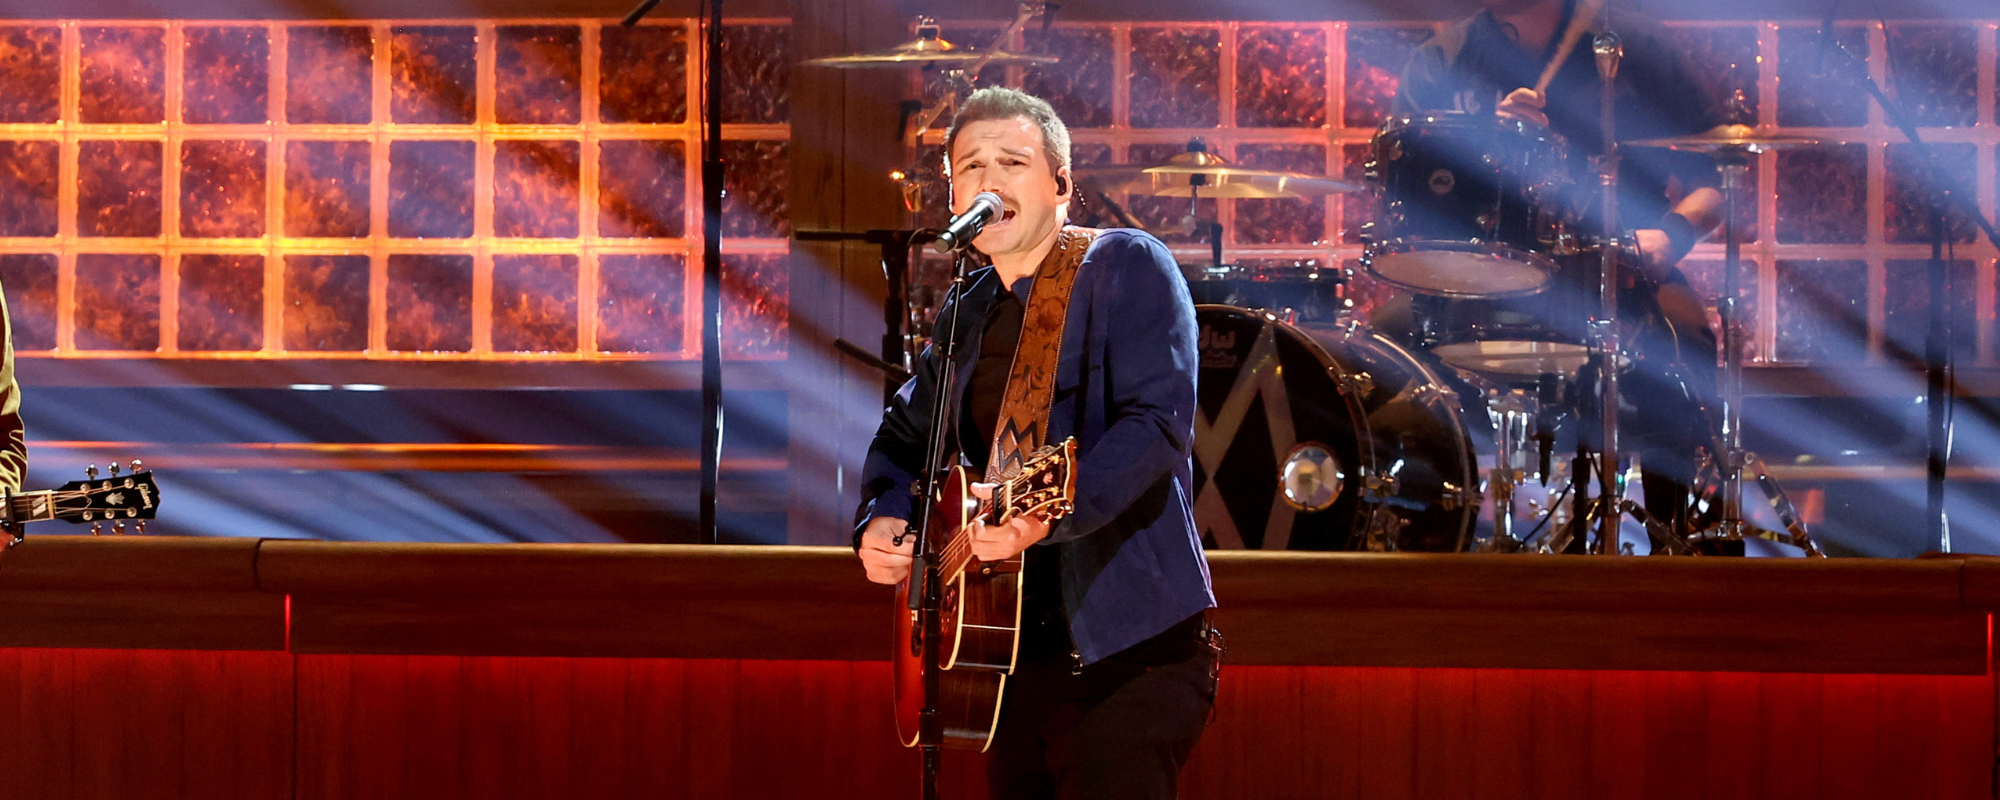 These 6 Morgan Wallen Songs Made Mincemeat of the Country Charts